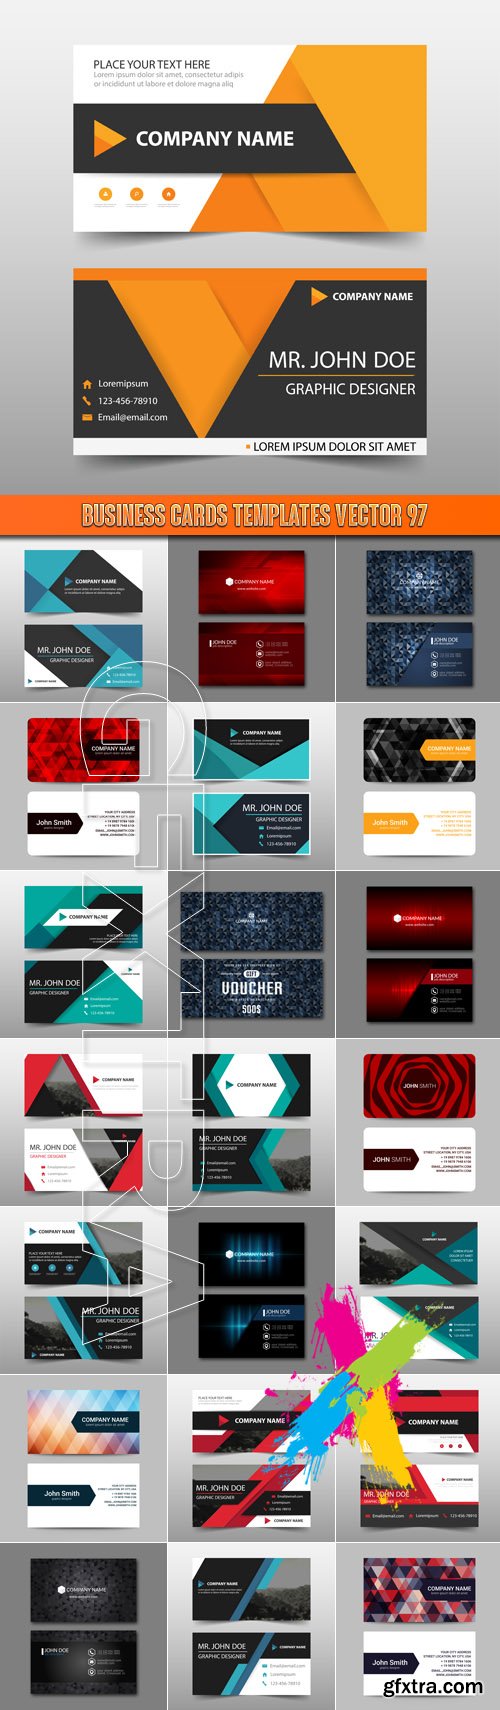 Business Cards Templates vector 97